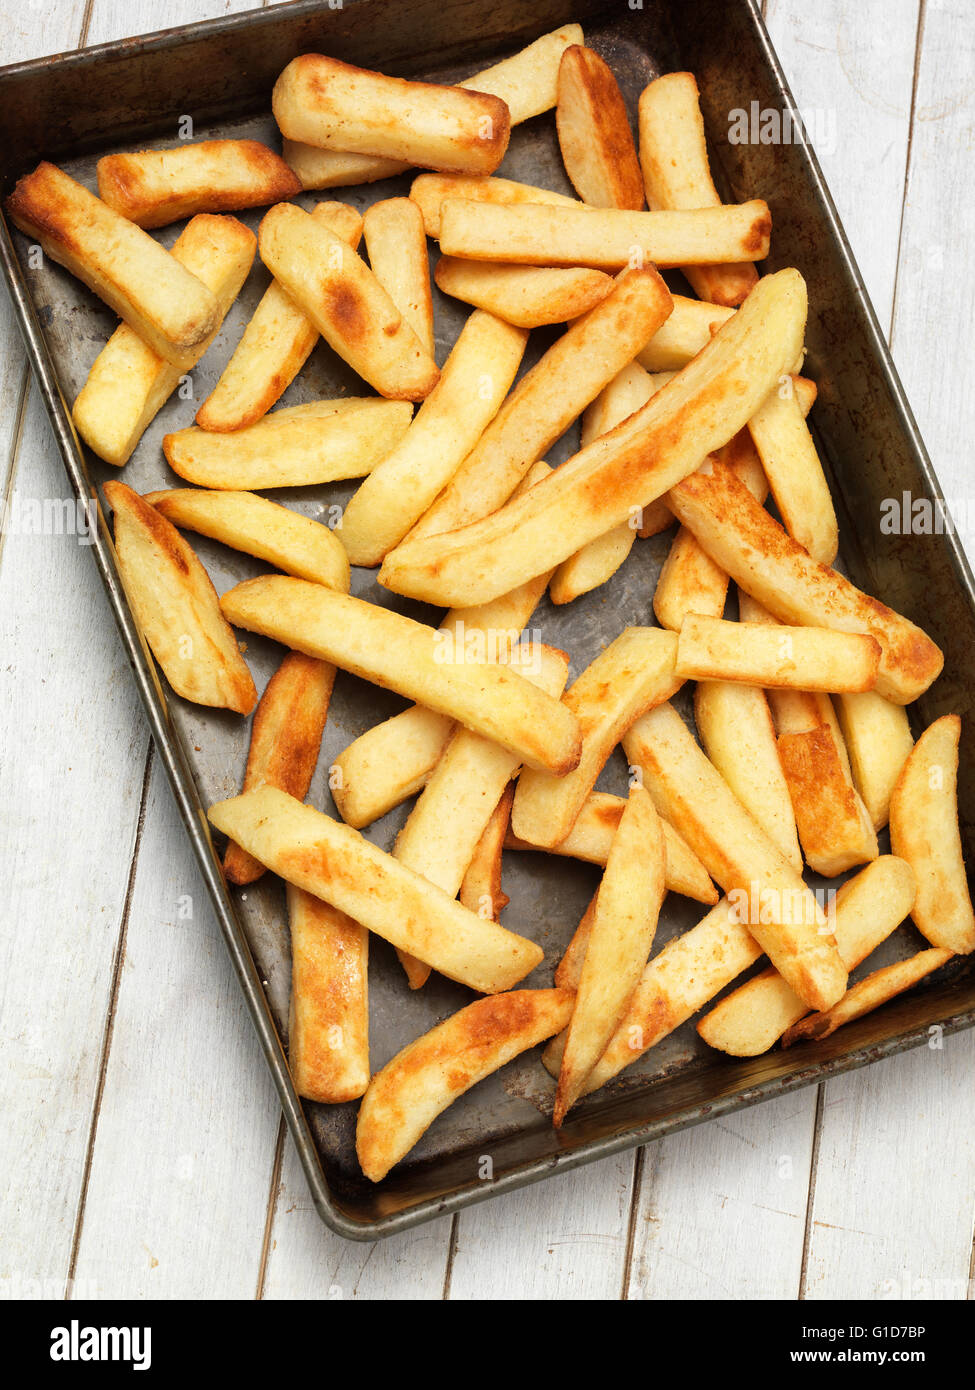 thick cut french fries Stock Photo